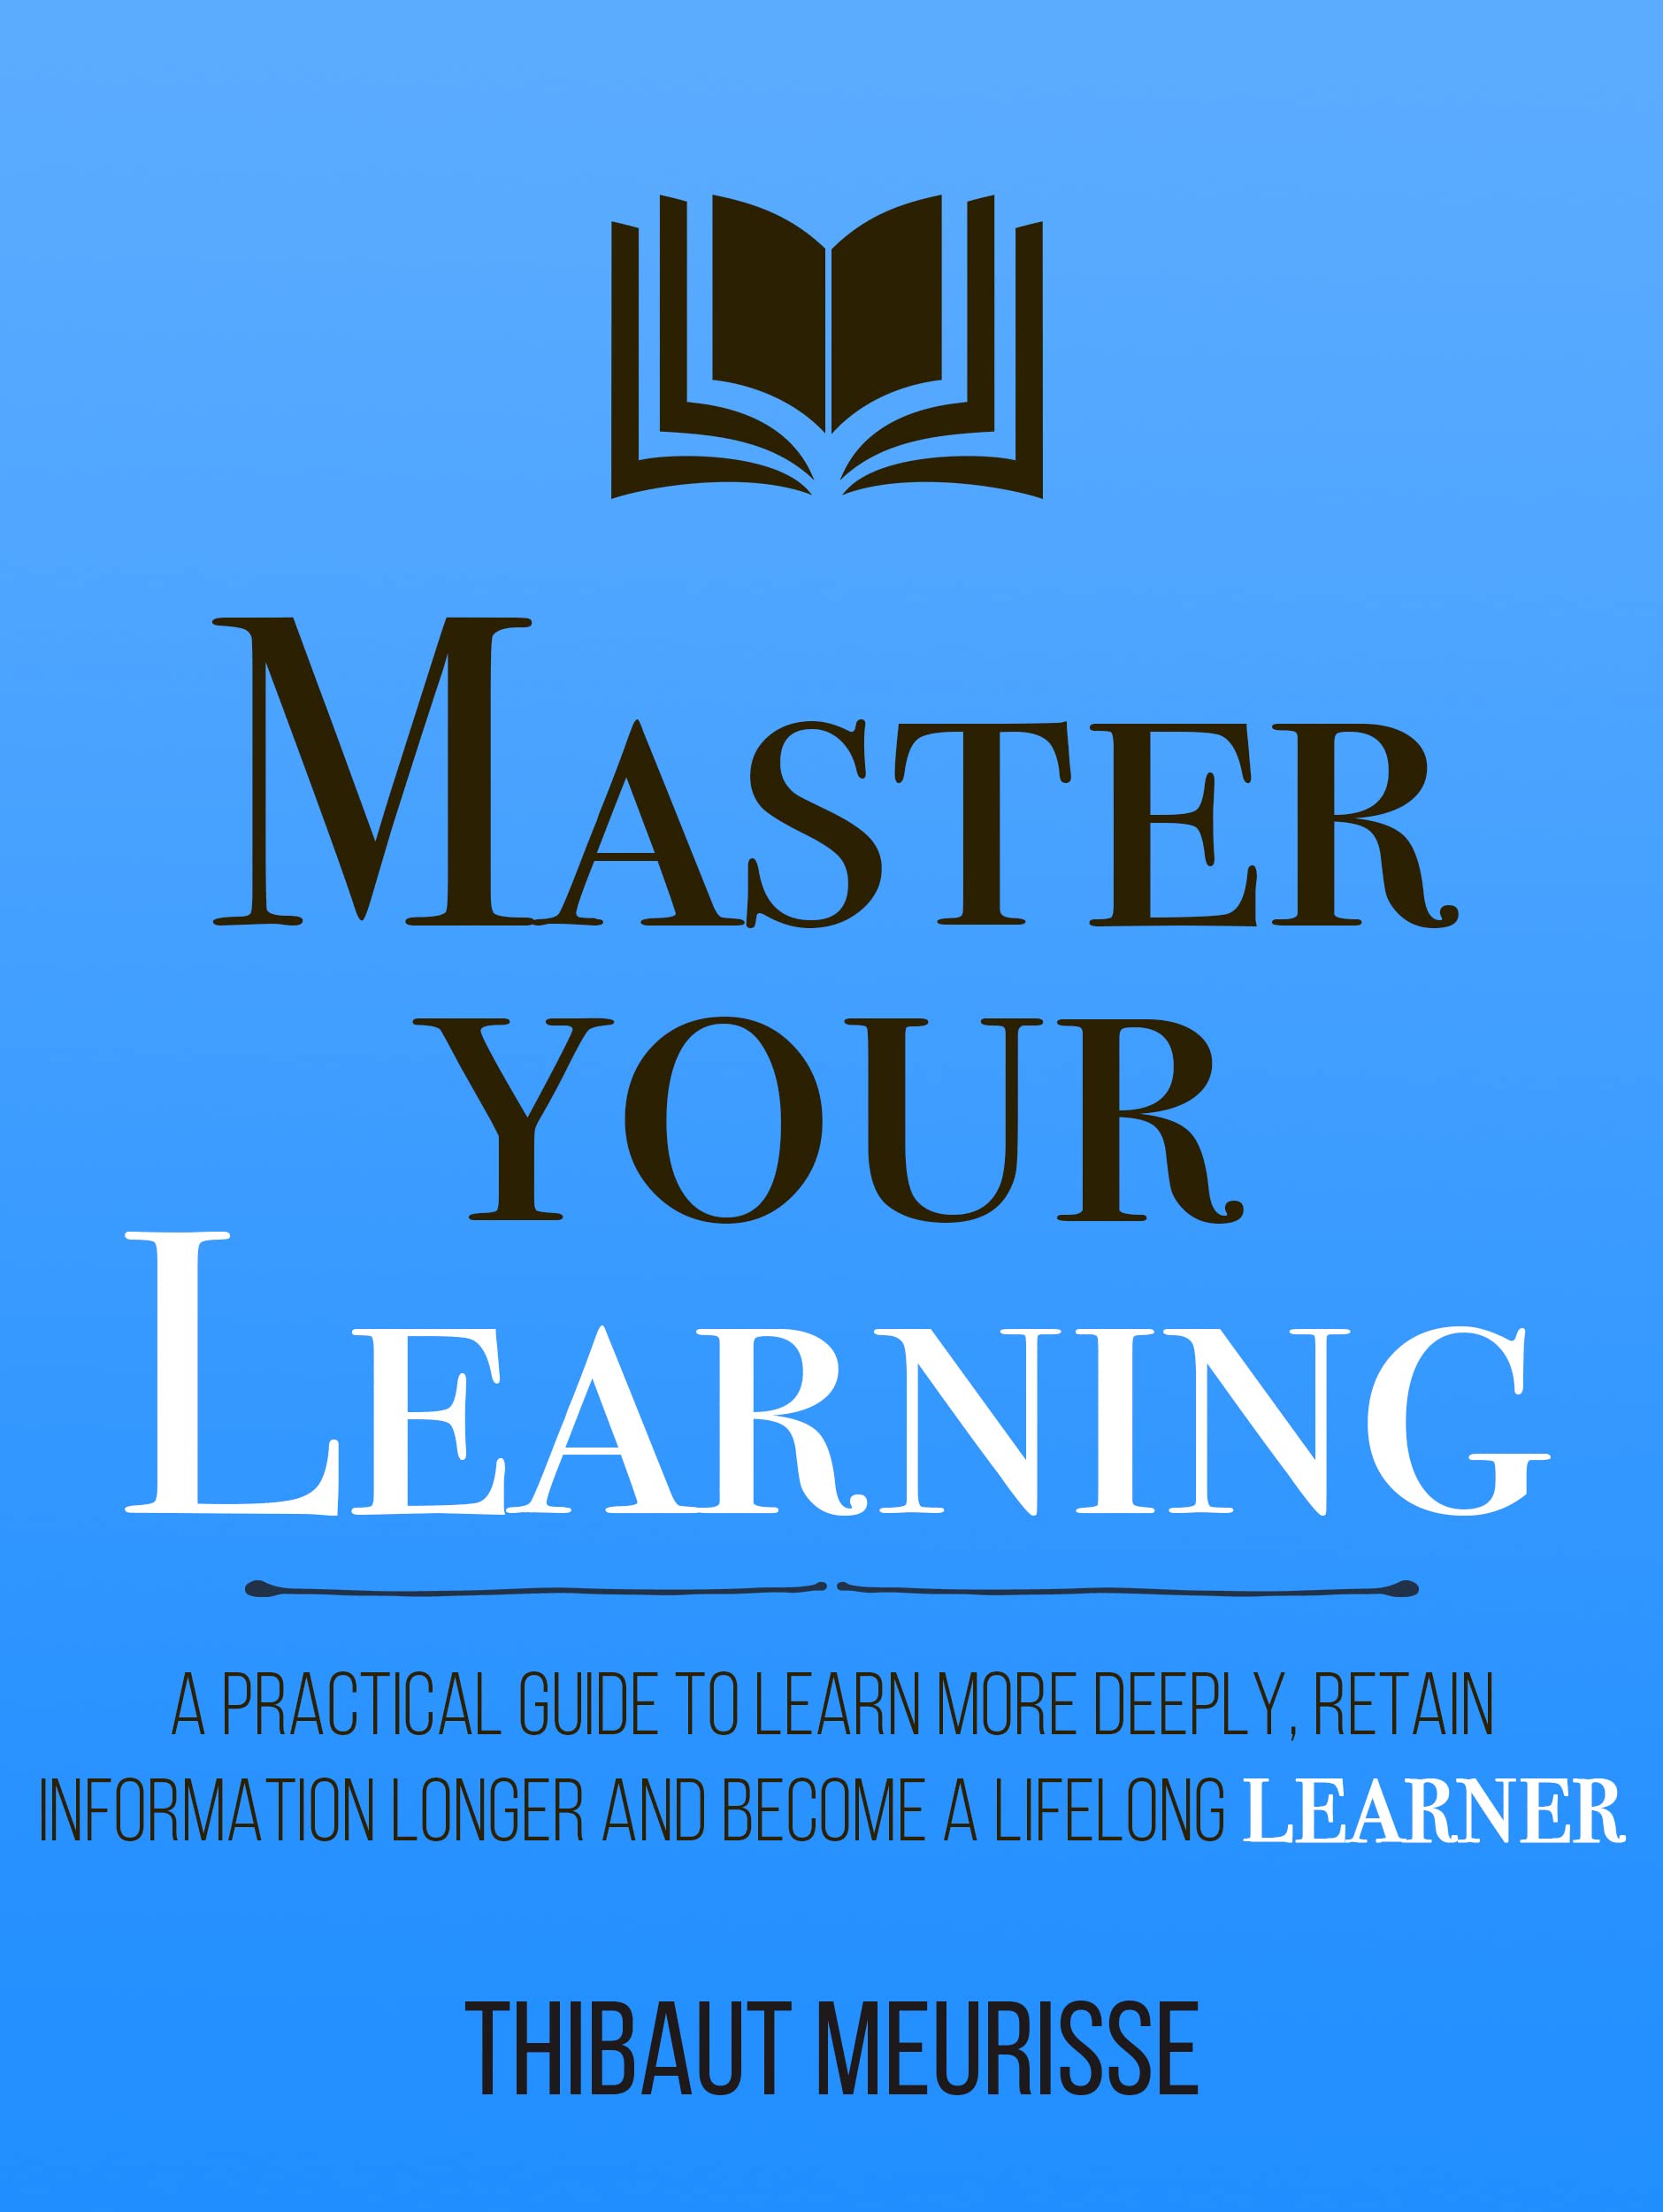 Master Your Learning : A Practical Guide to Learn More Deeply, Retain Information Longer and Become a Lifelong Learner (Mastery Series Book 9)